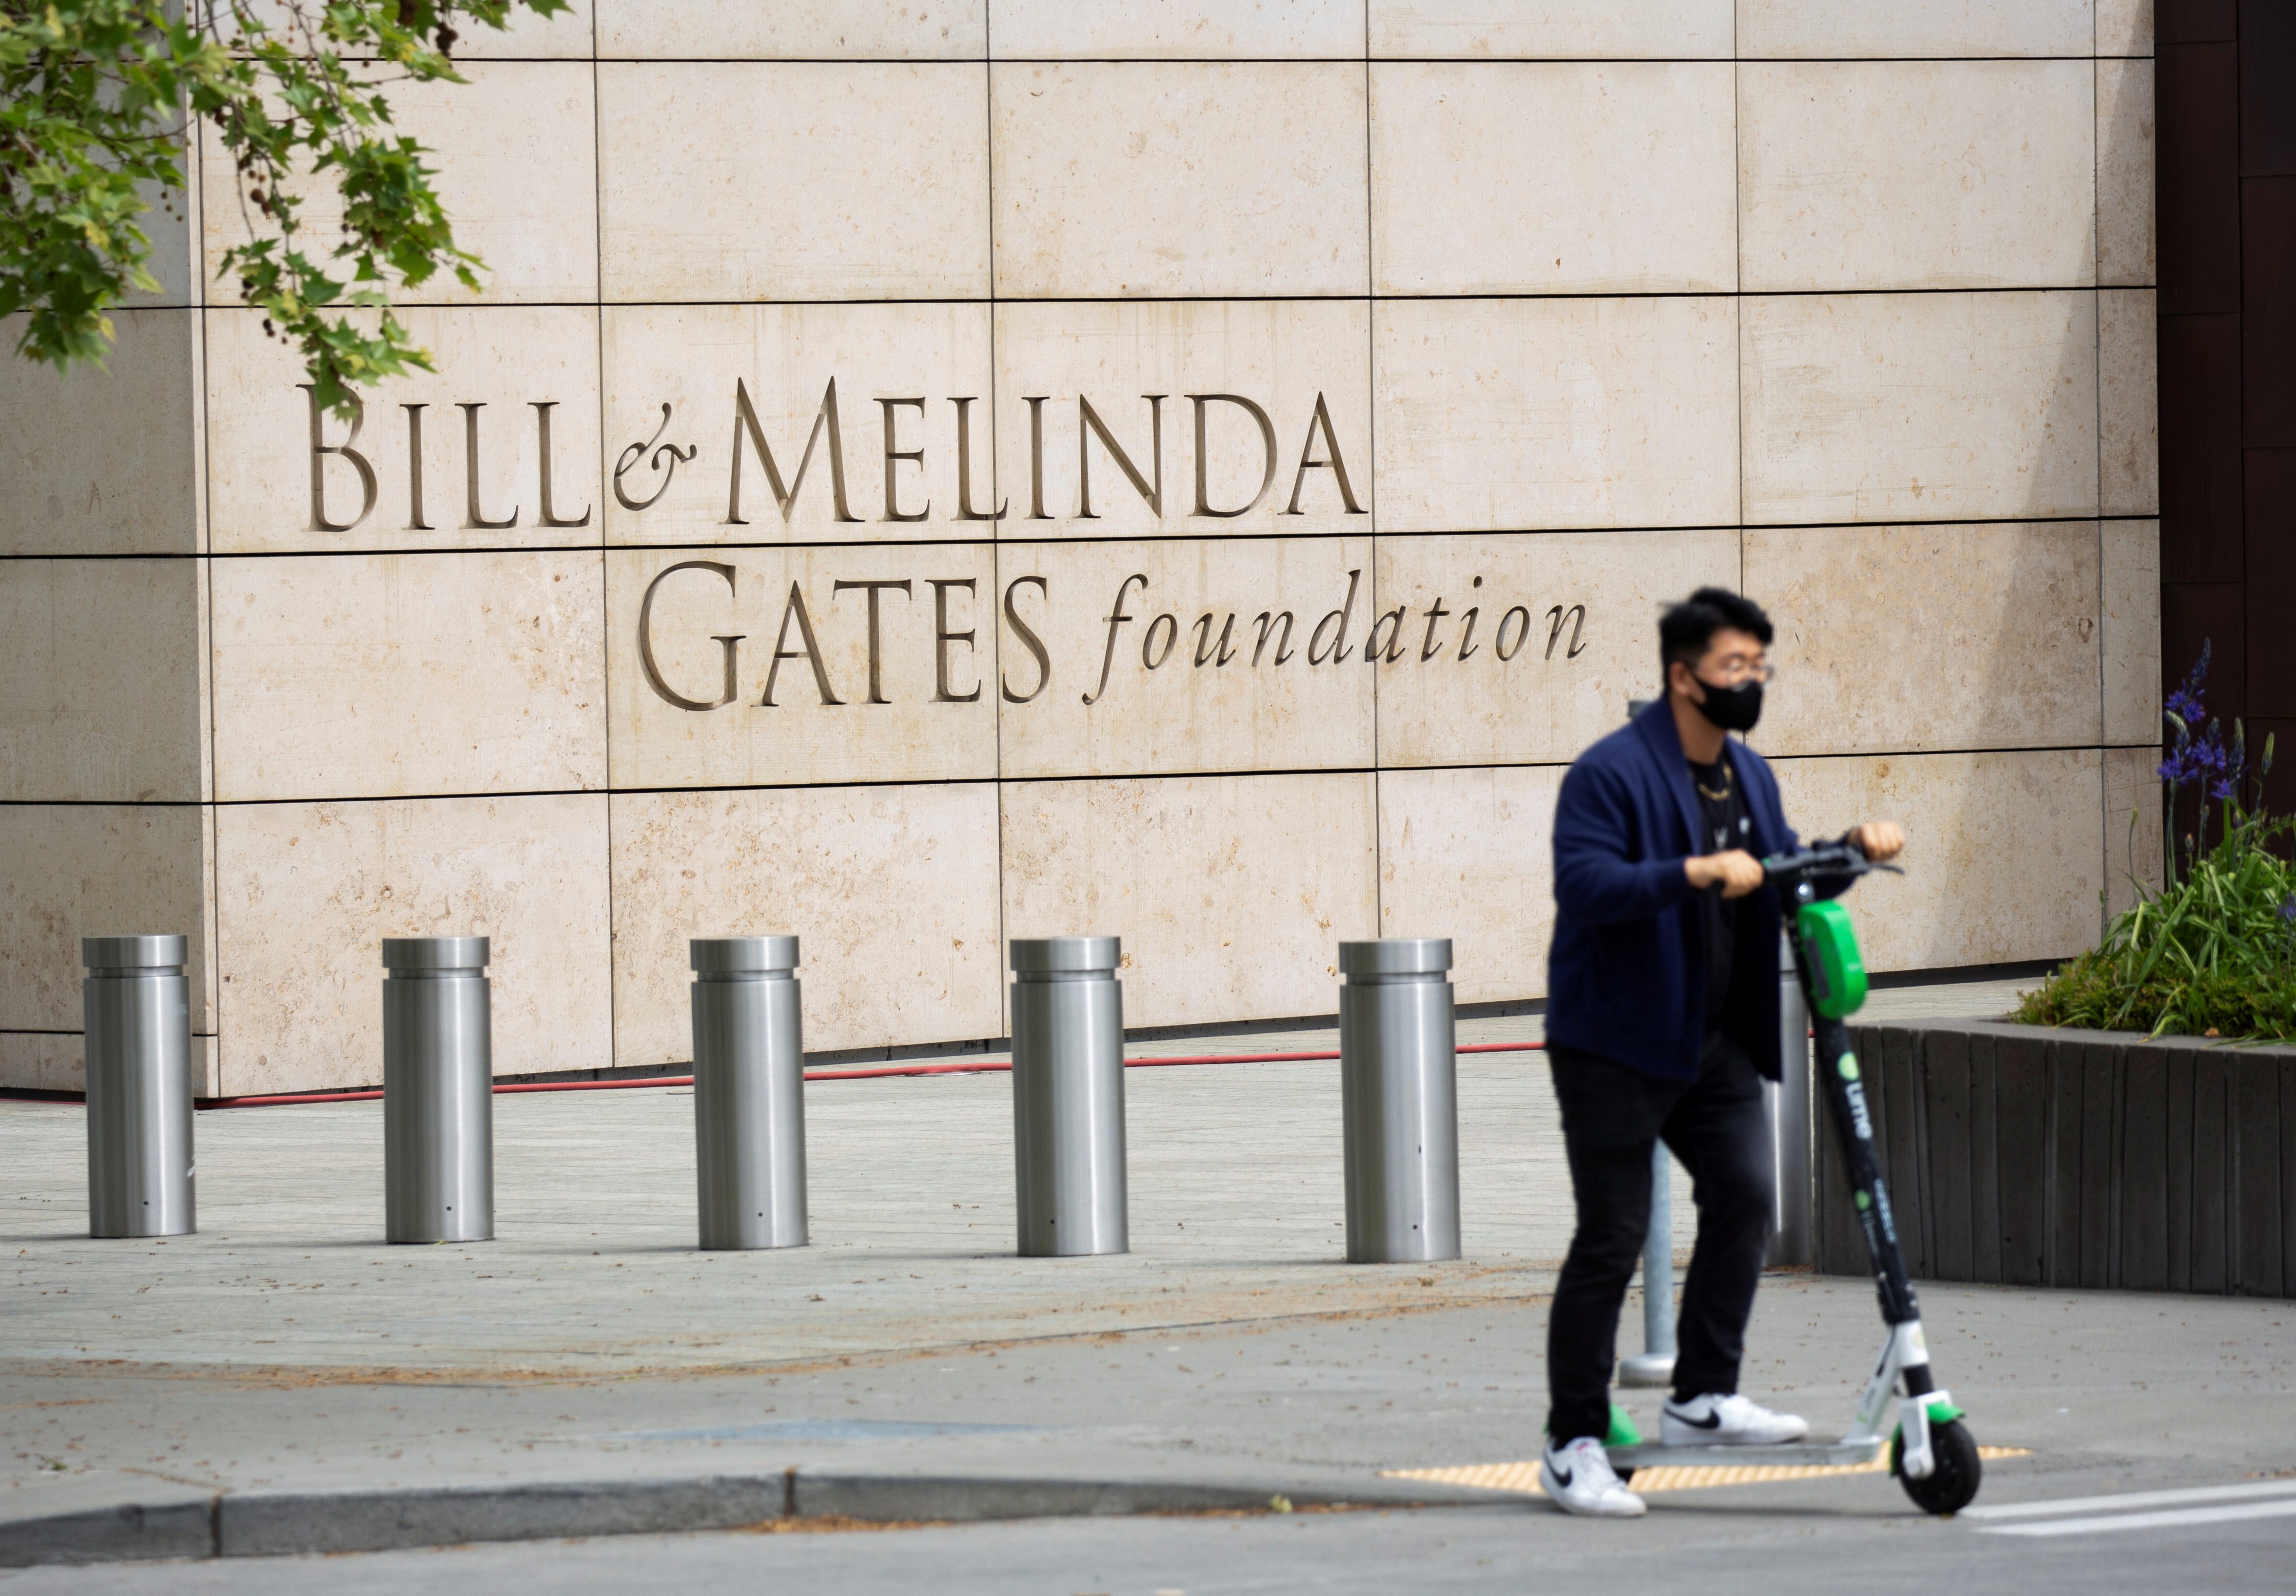 Bill Gates and Melinda French Gates explore changes to charitable foundation – WSJ